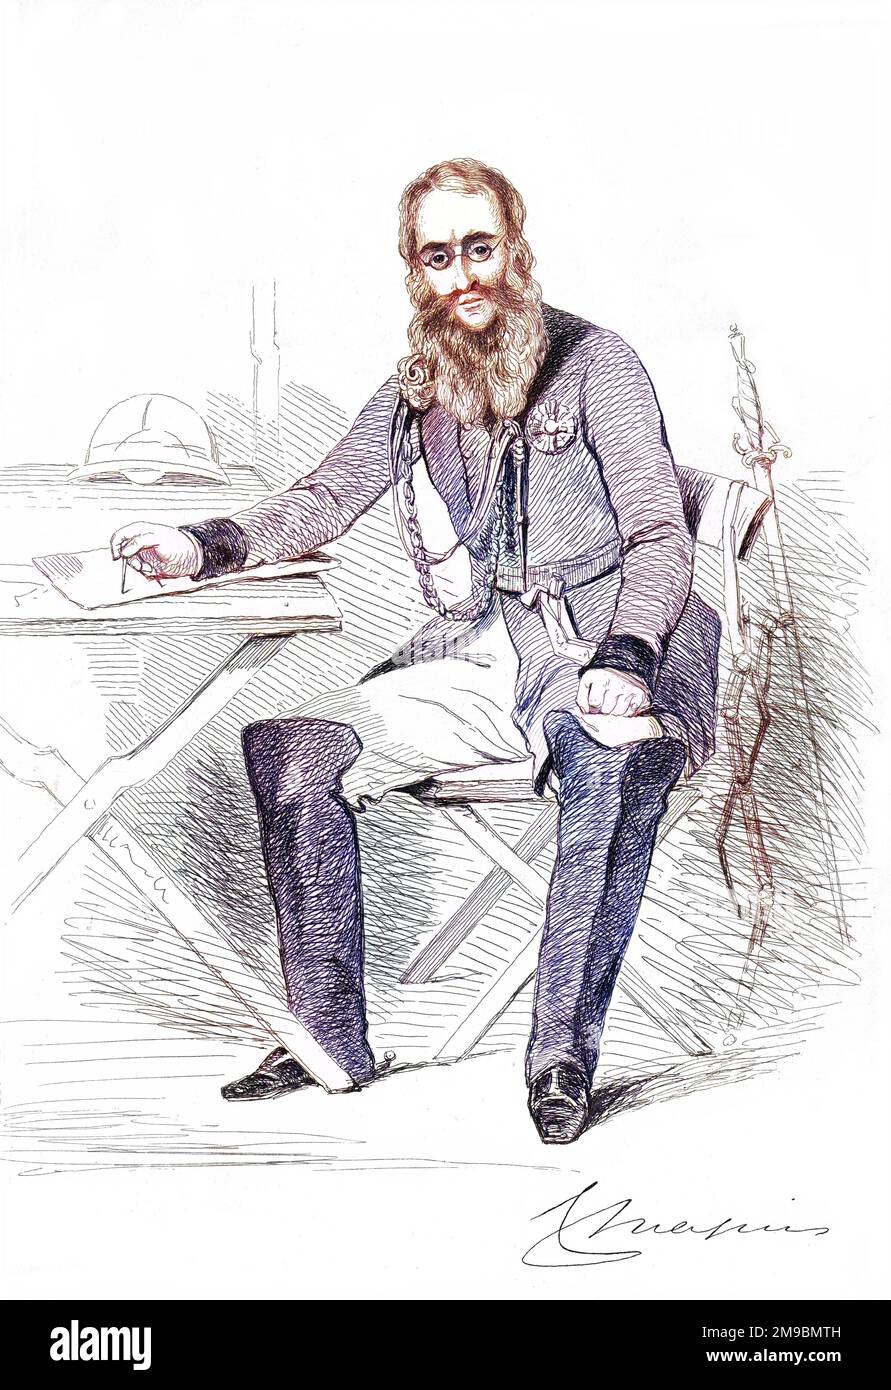 SIR CHARLES JAMES NAPIER (1782 - 1853), British military commander, seated in his tent. Stock Photo